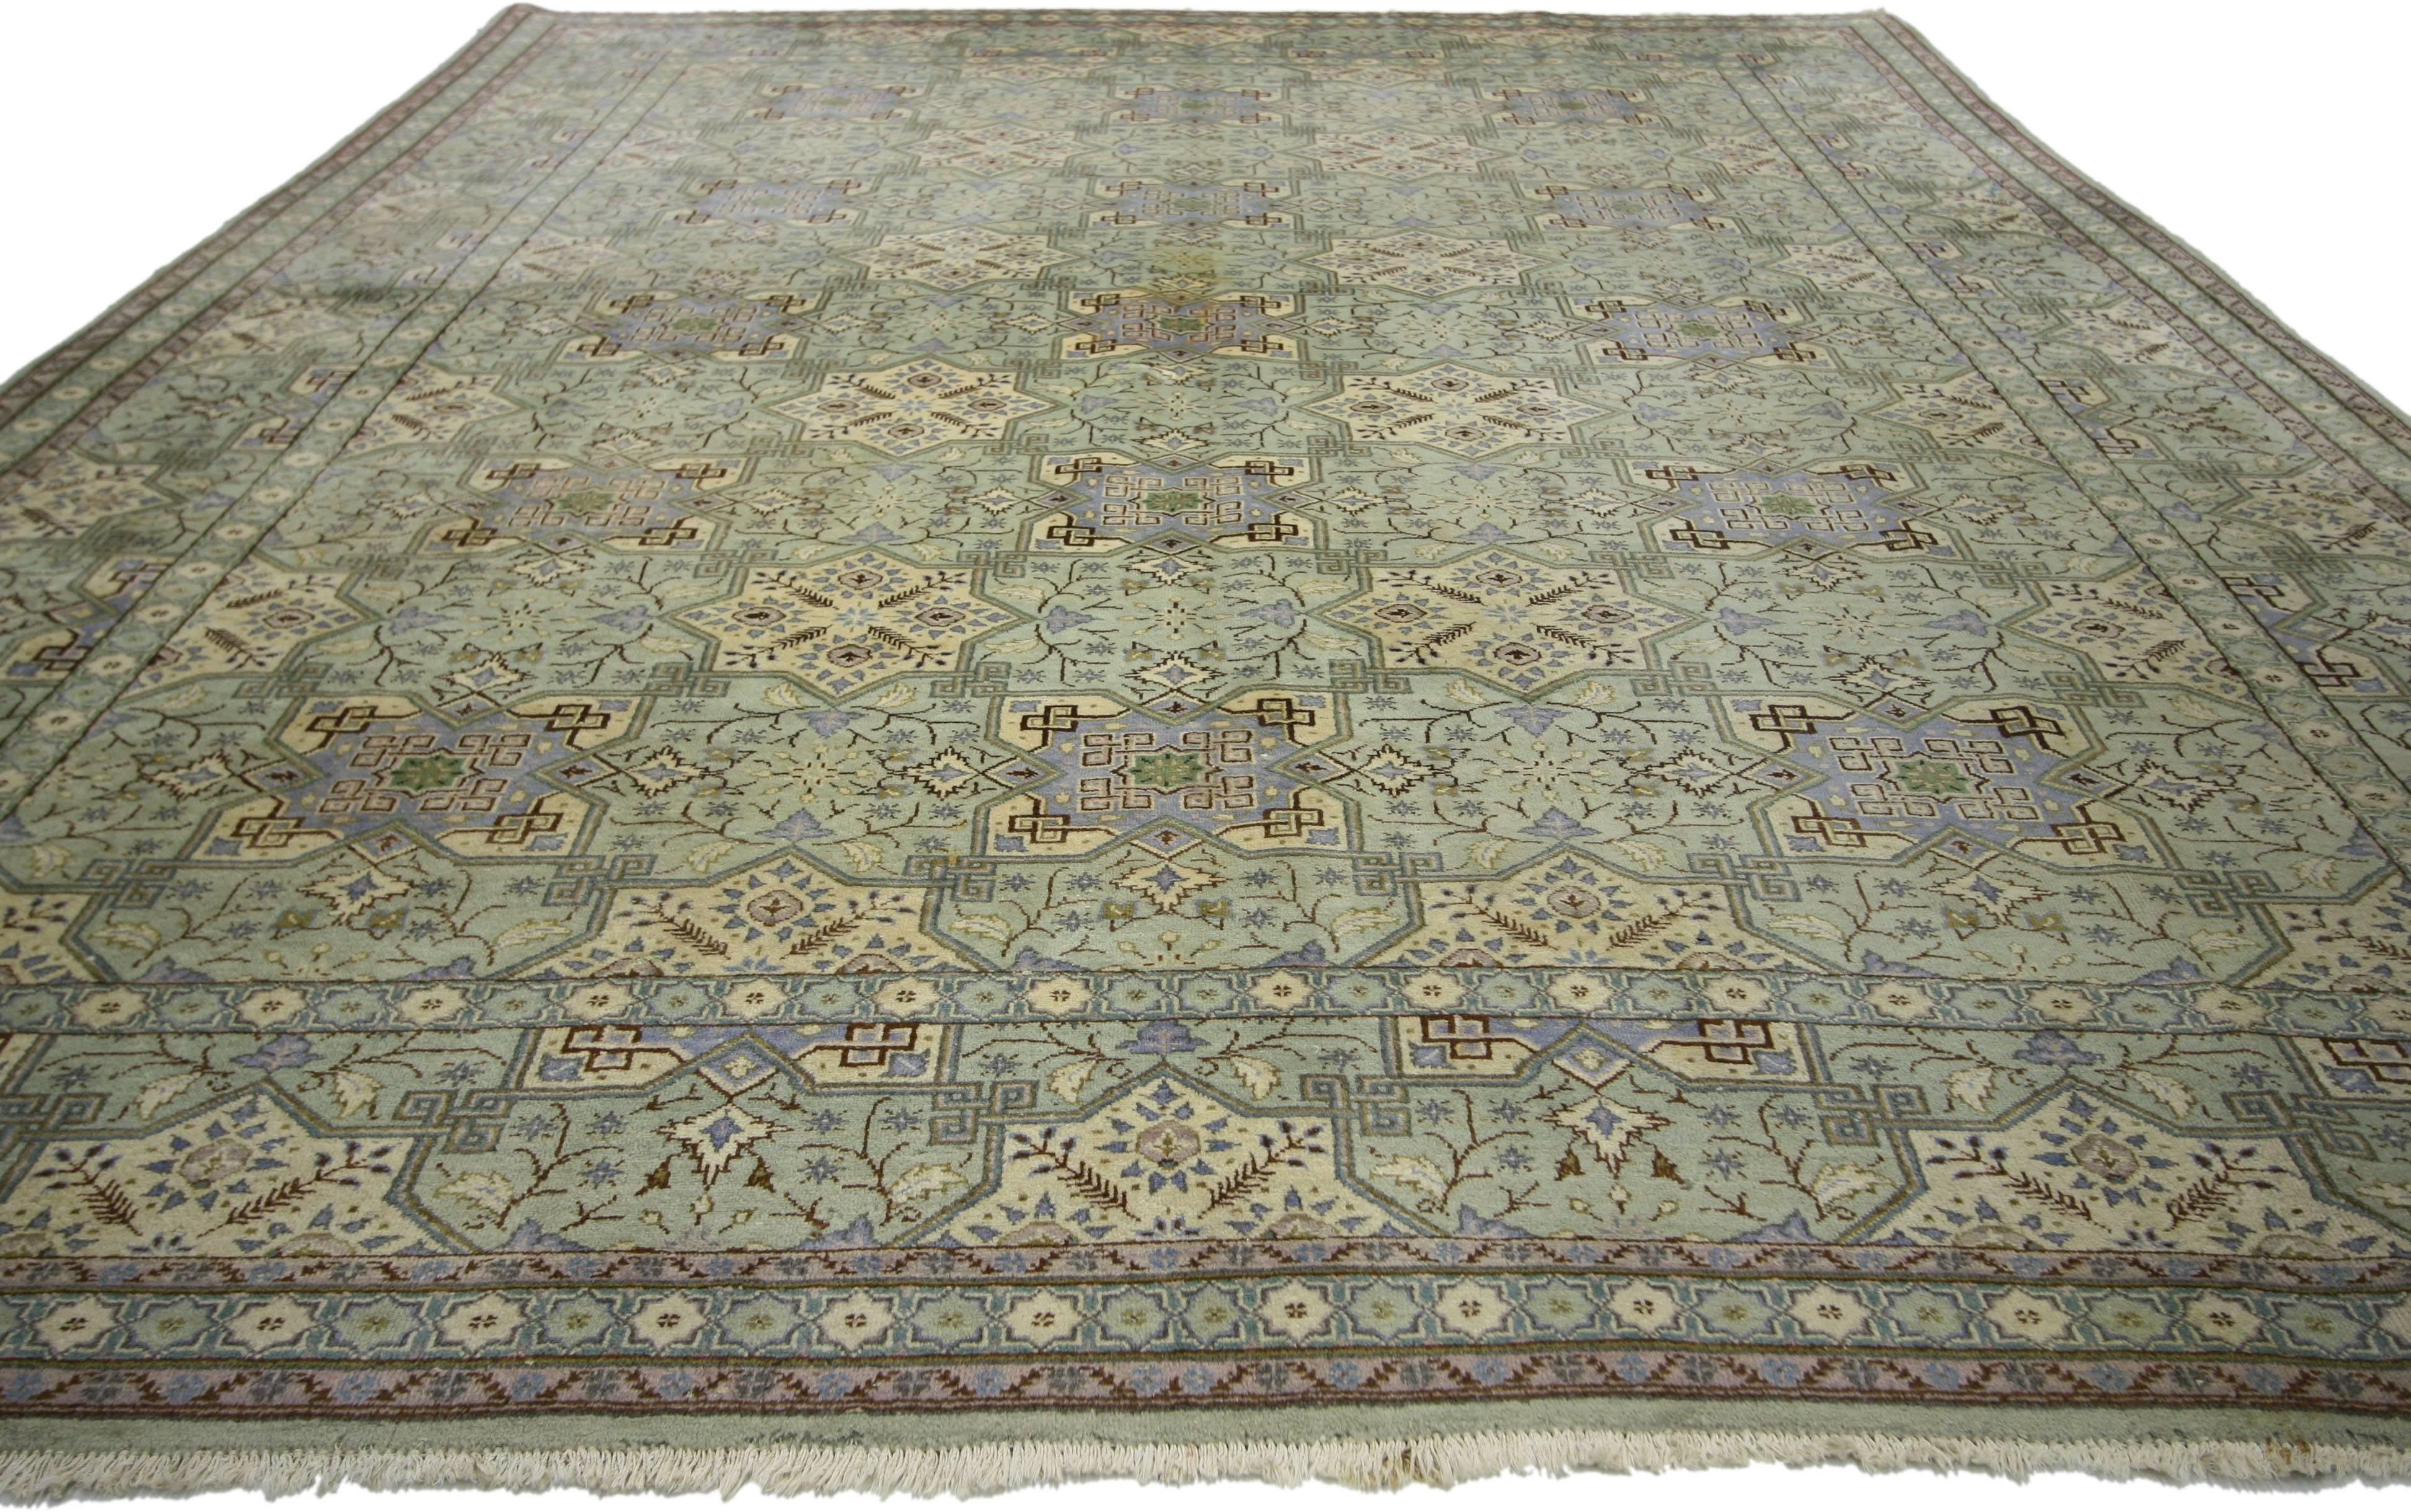 Kashan Vintage Persian Isfahan Rug with Gustavian Grace and Georgian Style